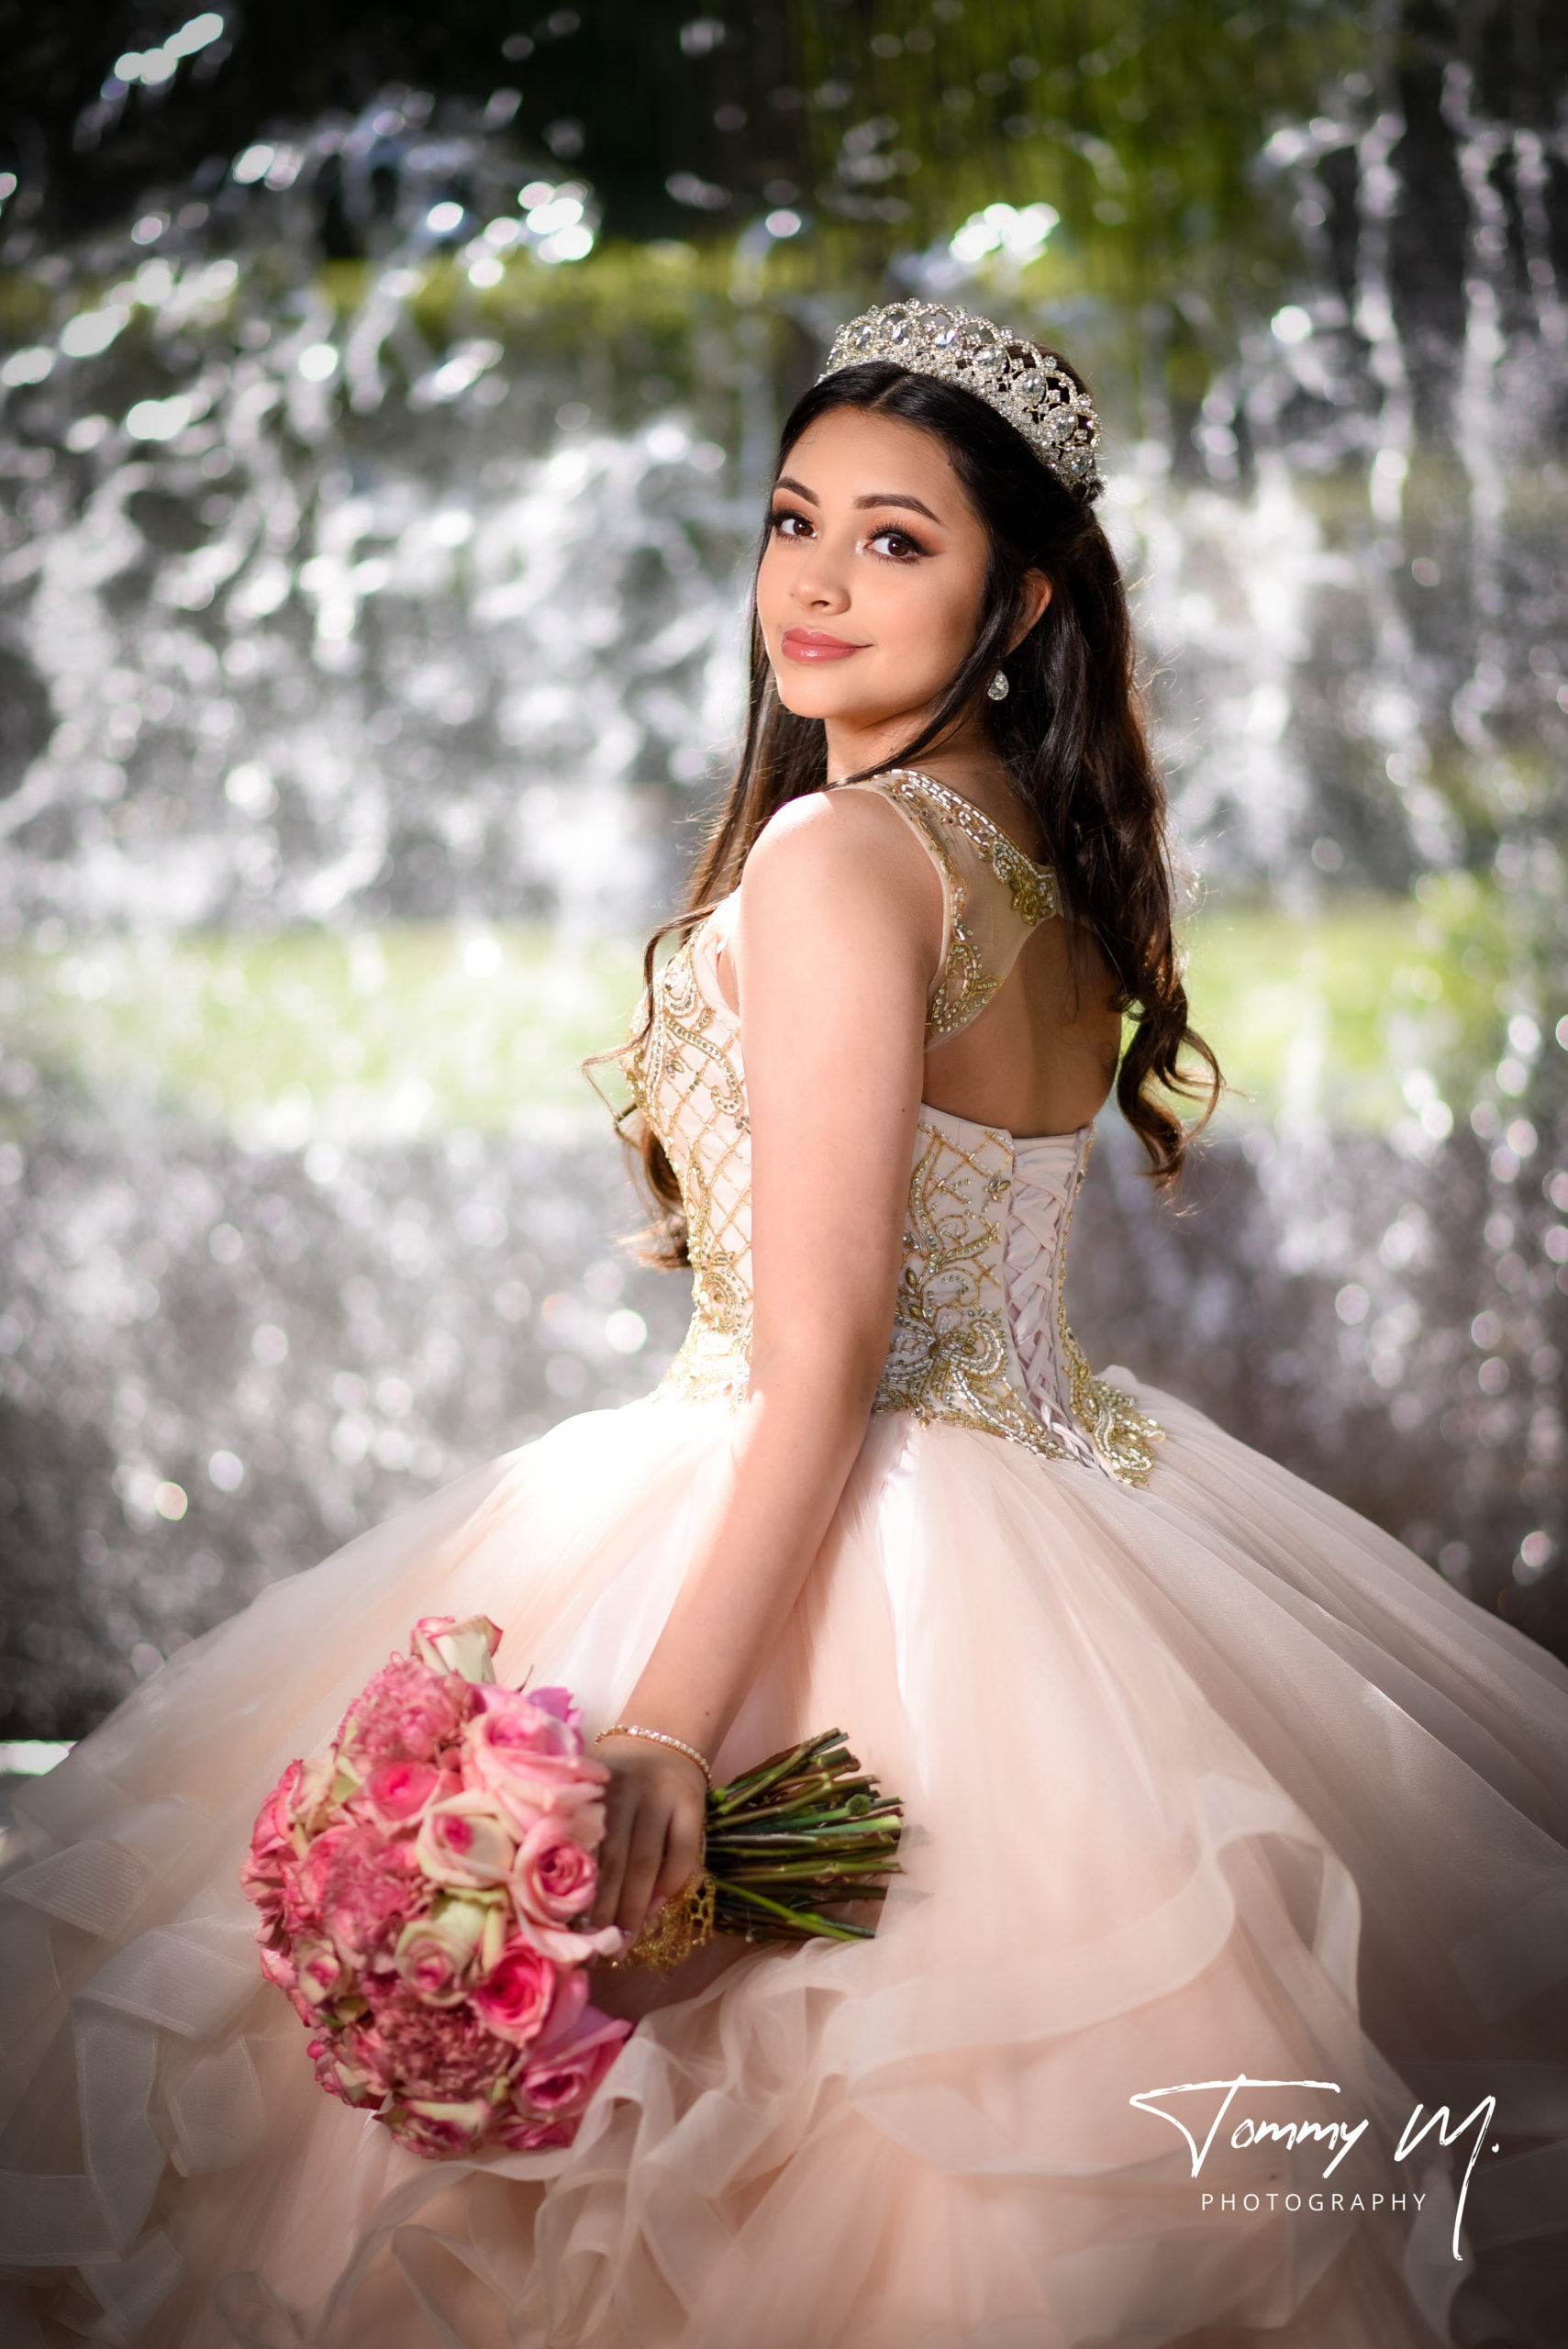 Pin by Jessica Valdez on Nicole's quince | Quinceanera photoshoot,  Quinceanera dresses pink, Quinceanera photography